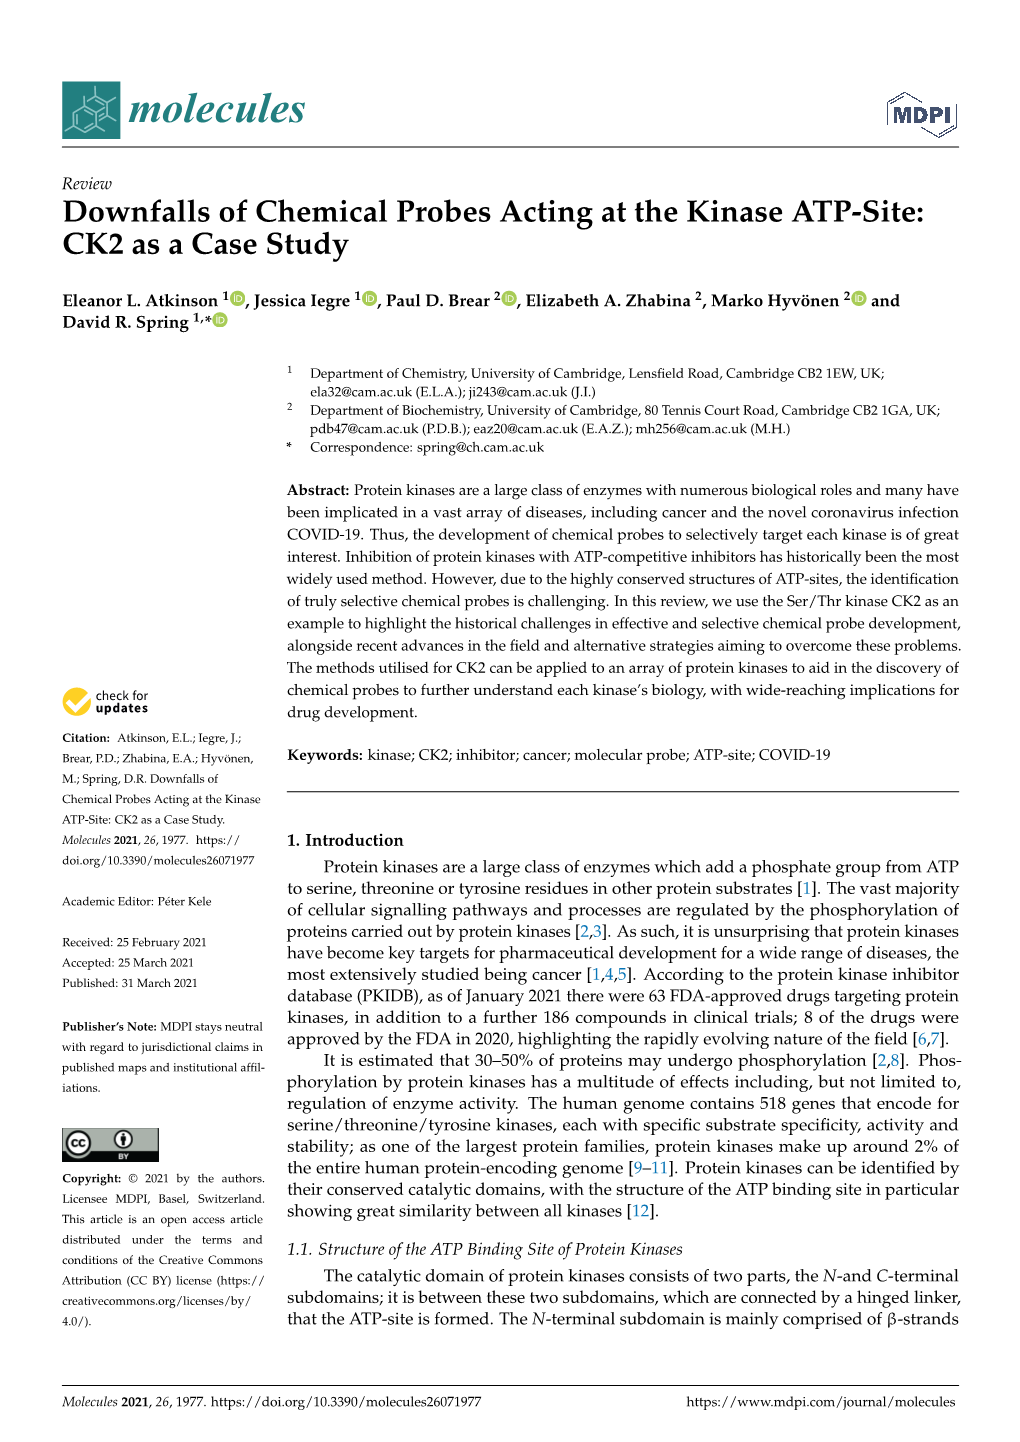 Downfalls of Chemical Probes Acting at the Kinase ATP-Site: CK2 As a Case Study